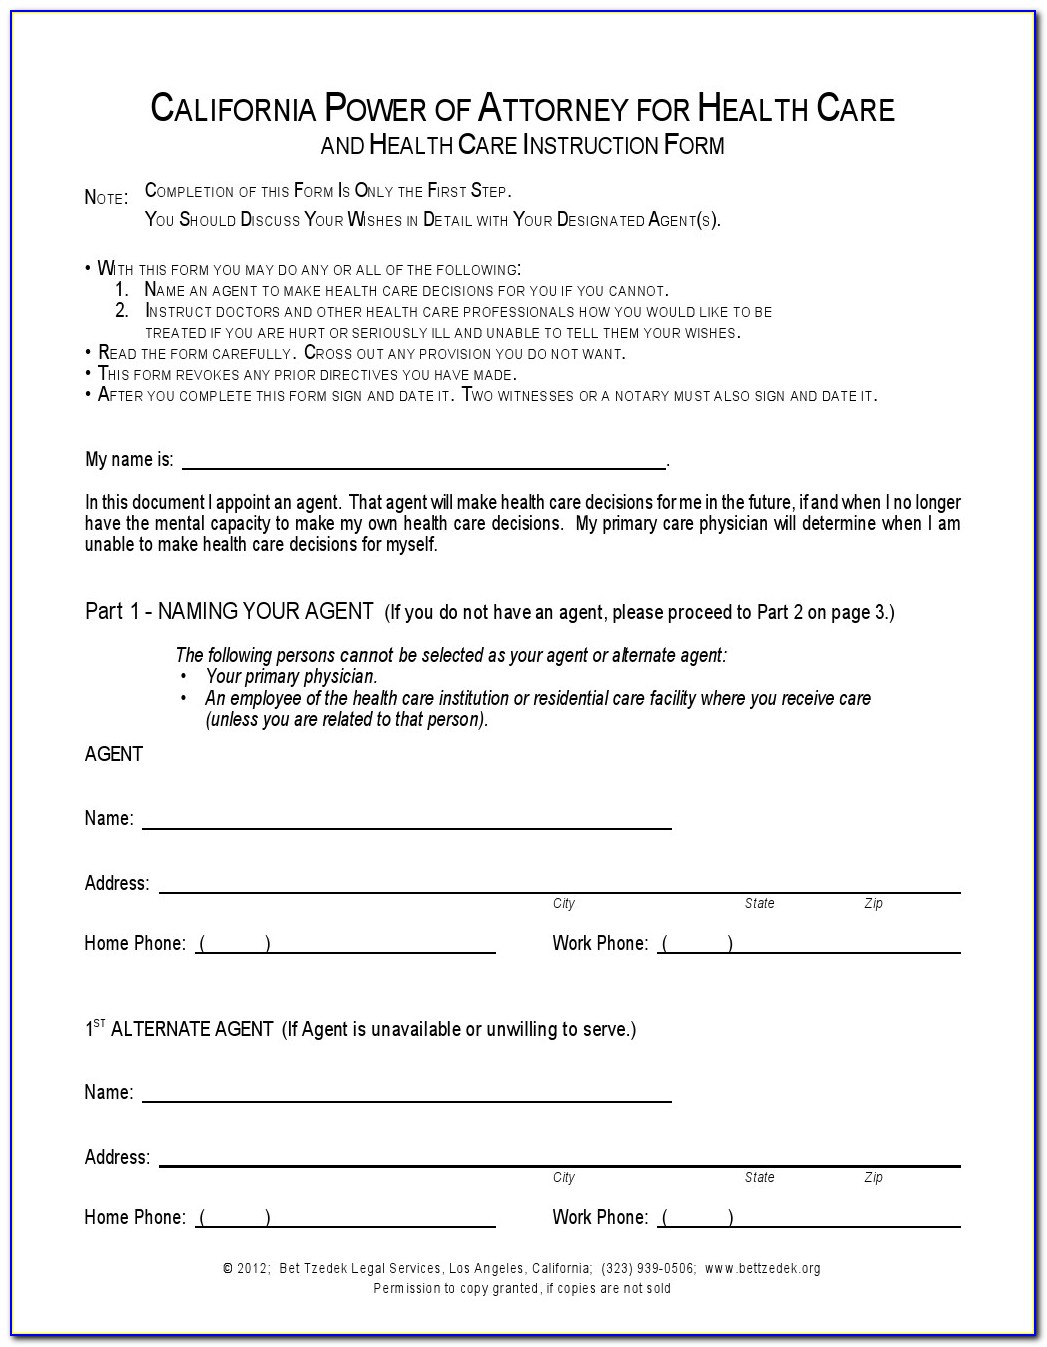 California Medical Association Durable Power Of Attorney For Health Care Form